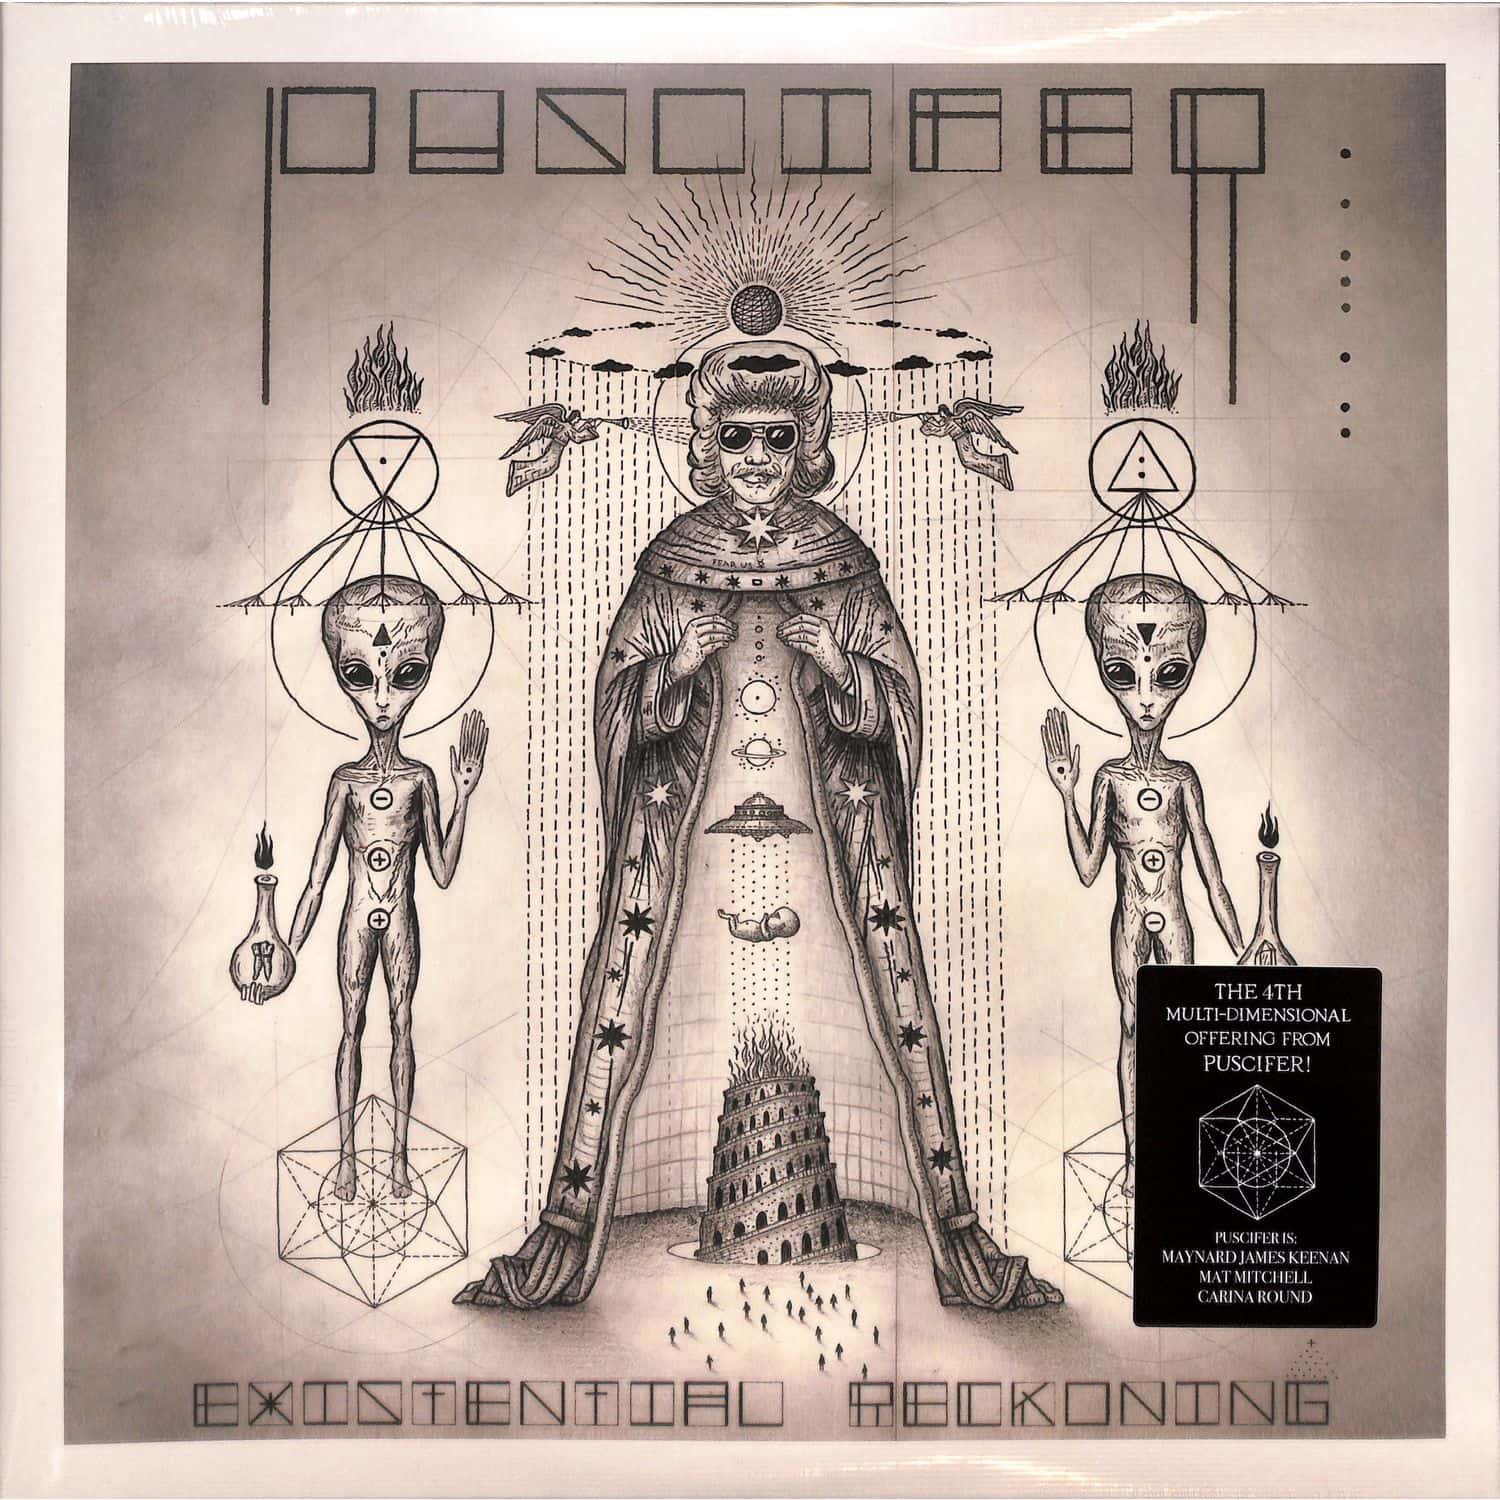 Puscifer - EXISTENTIAL RECKONING 